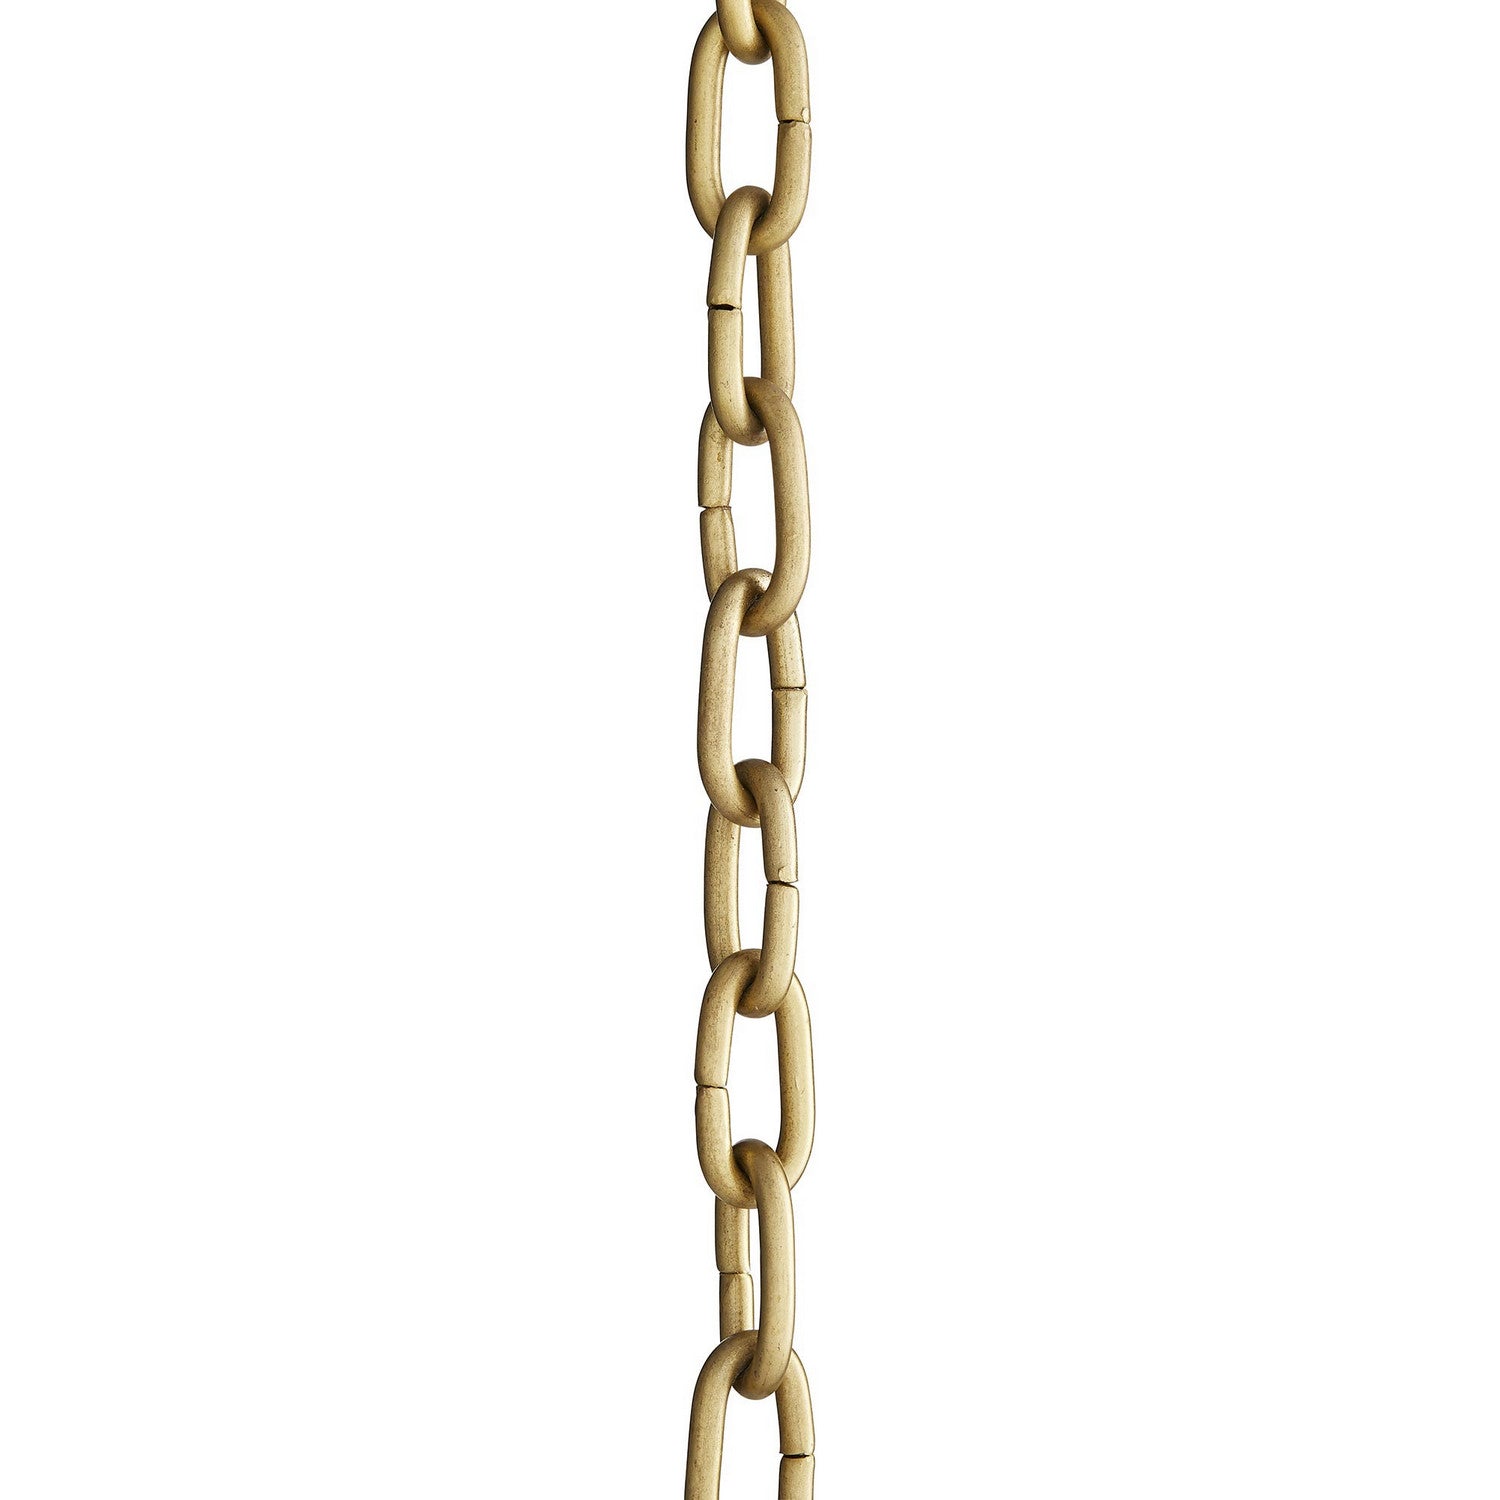 Arteriors - CHN-135 - 3' Extension Chain - Chain - Polished Brass